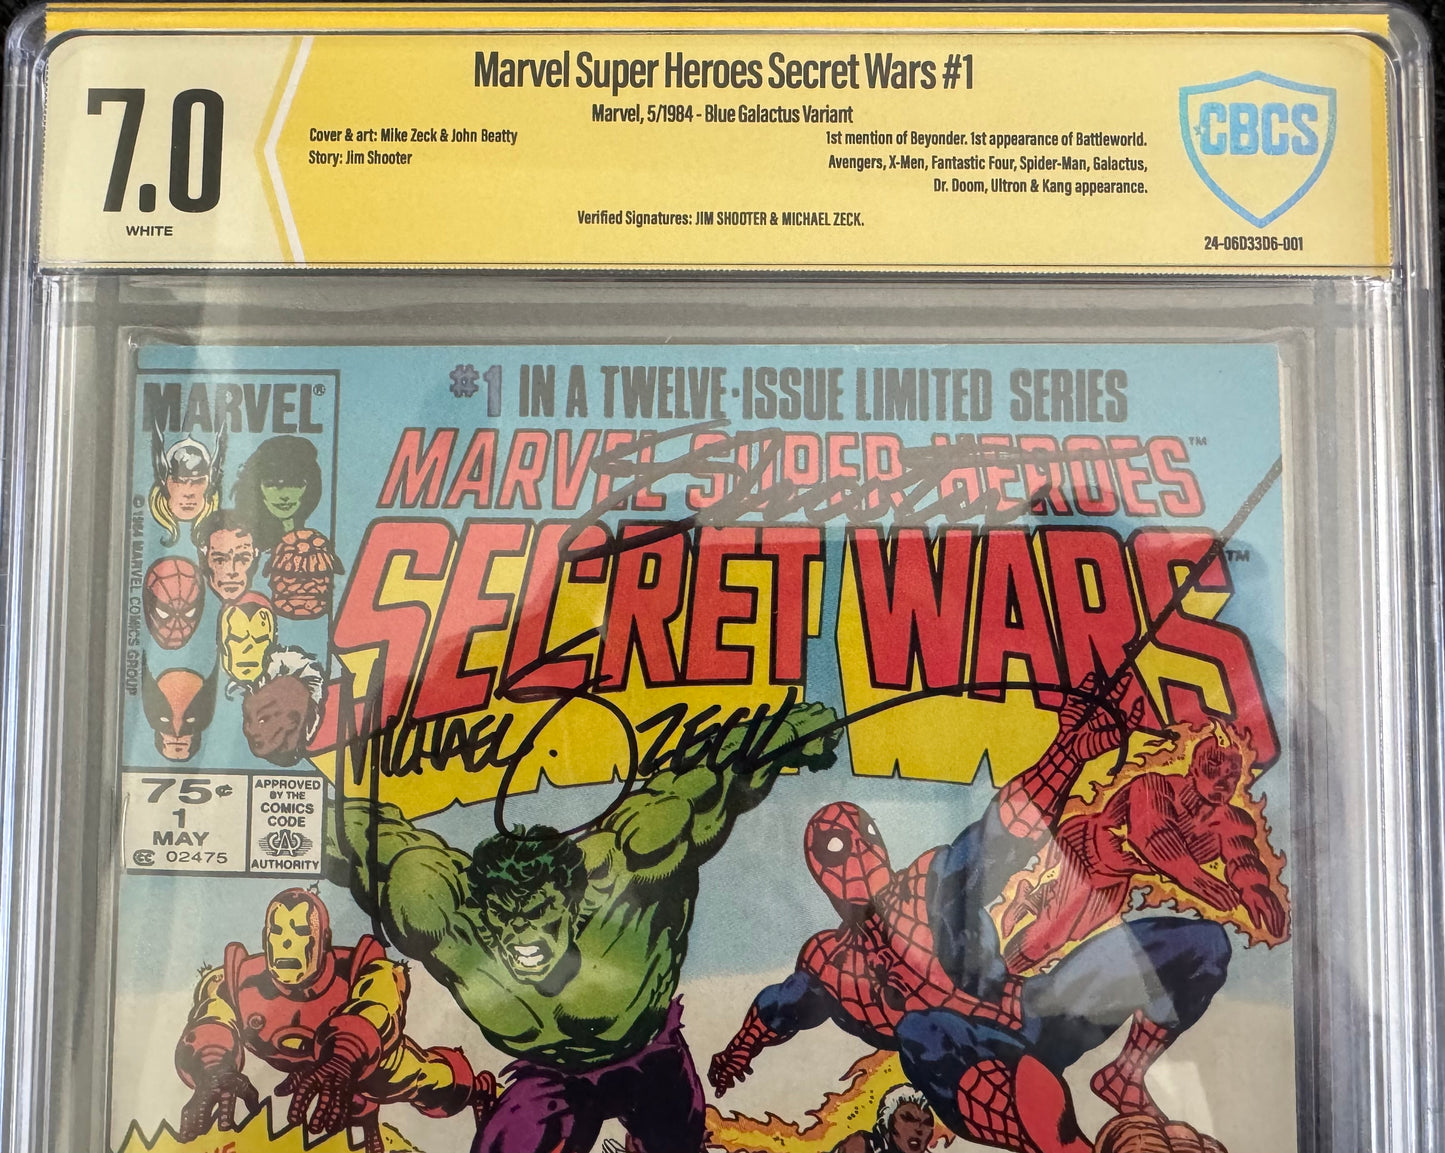 Marvel Superheroes Secret Wars #1 CBCS 7.0 Signed by Mike Zeck and Jim Shooter (Newstand)